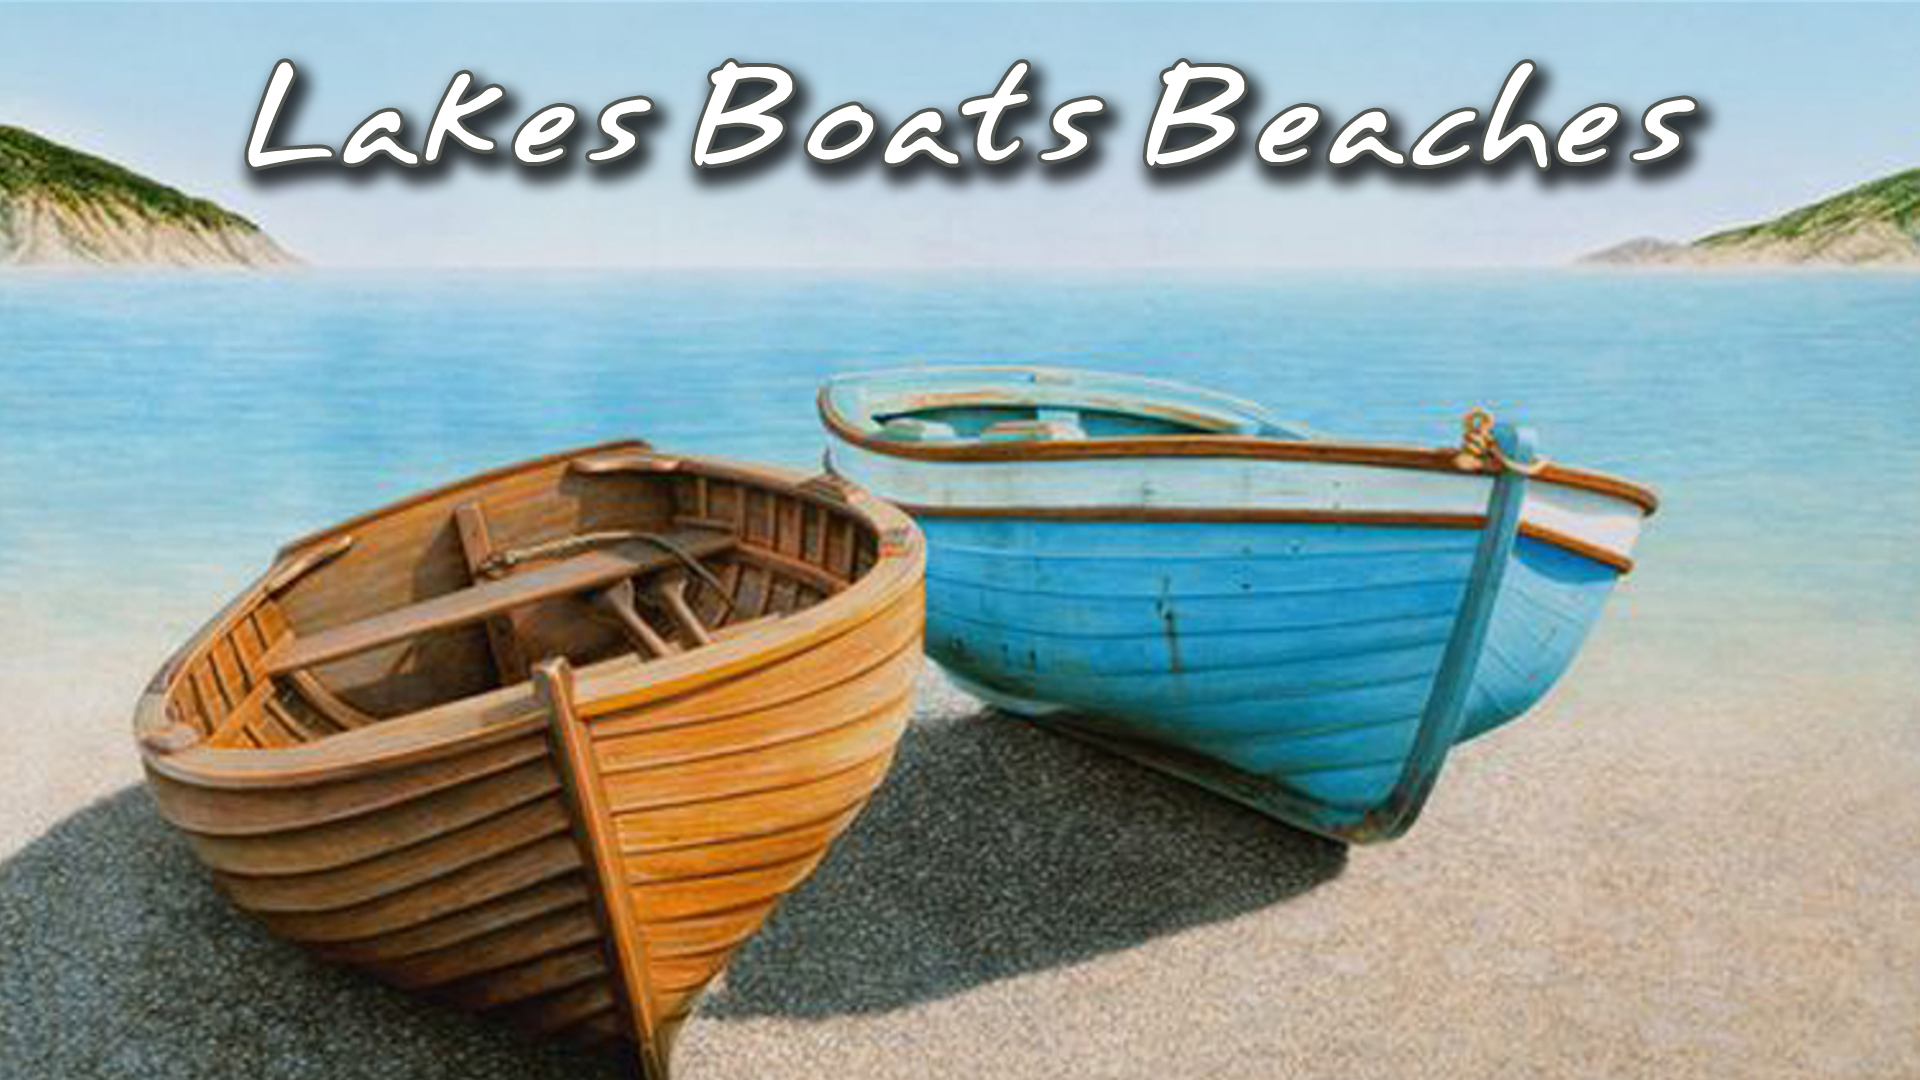 Lakes Boats Beaches – When all was said and done